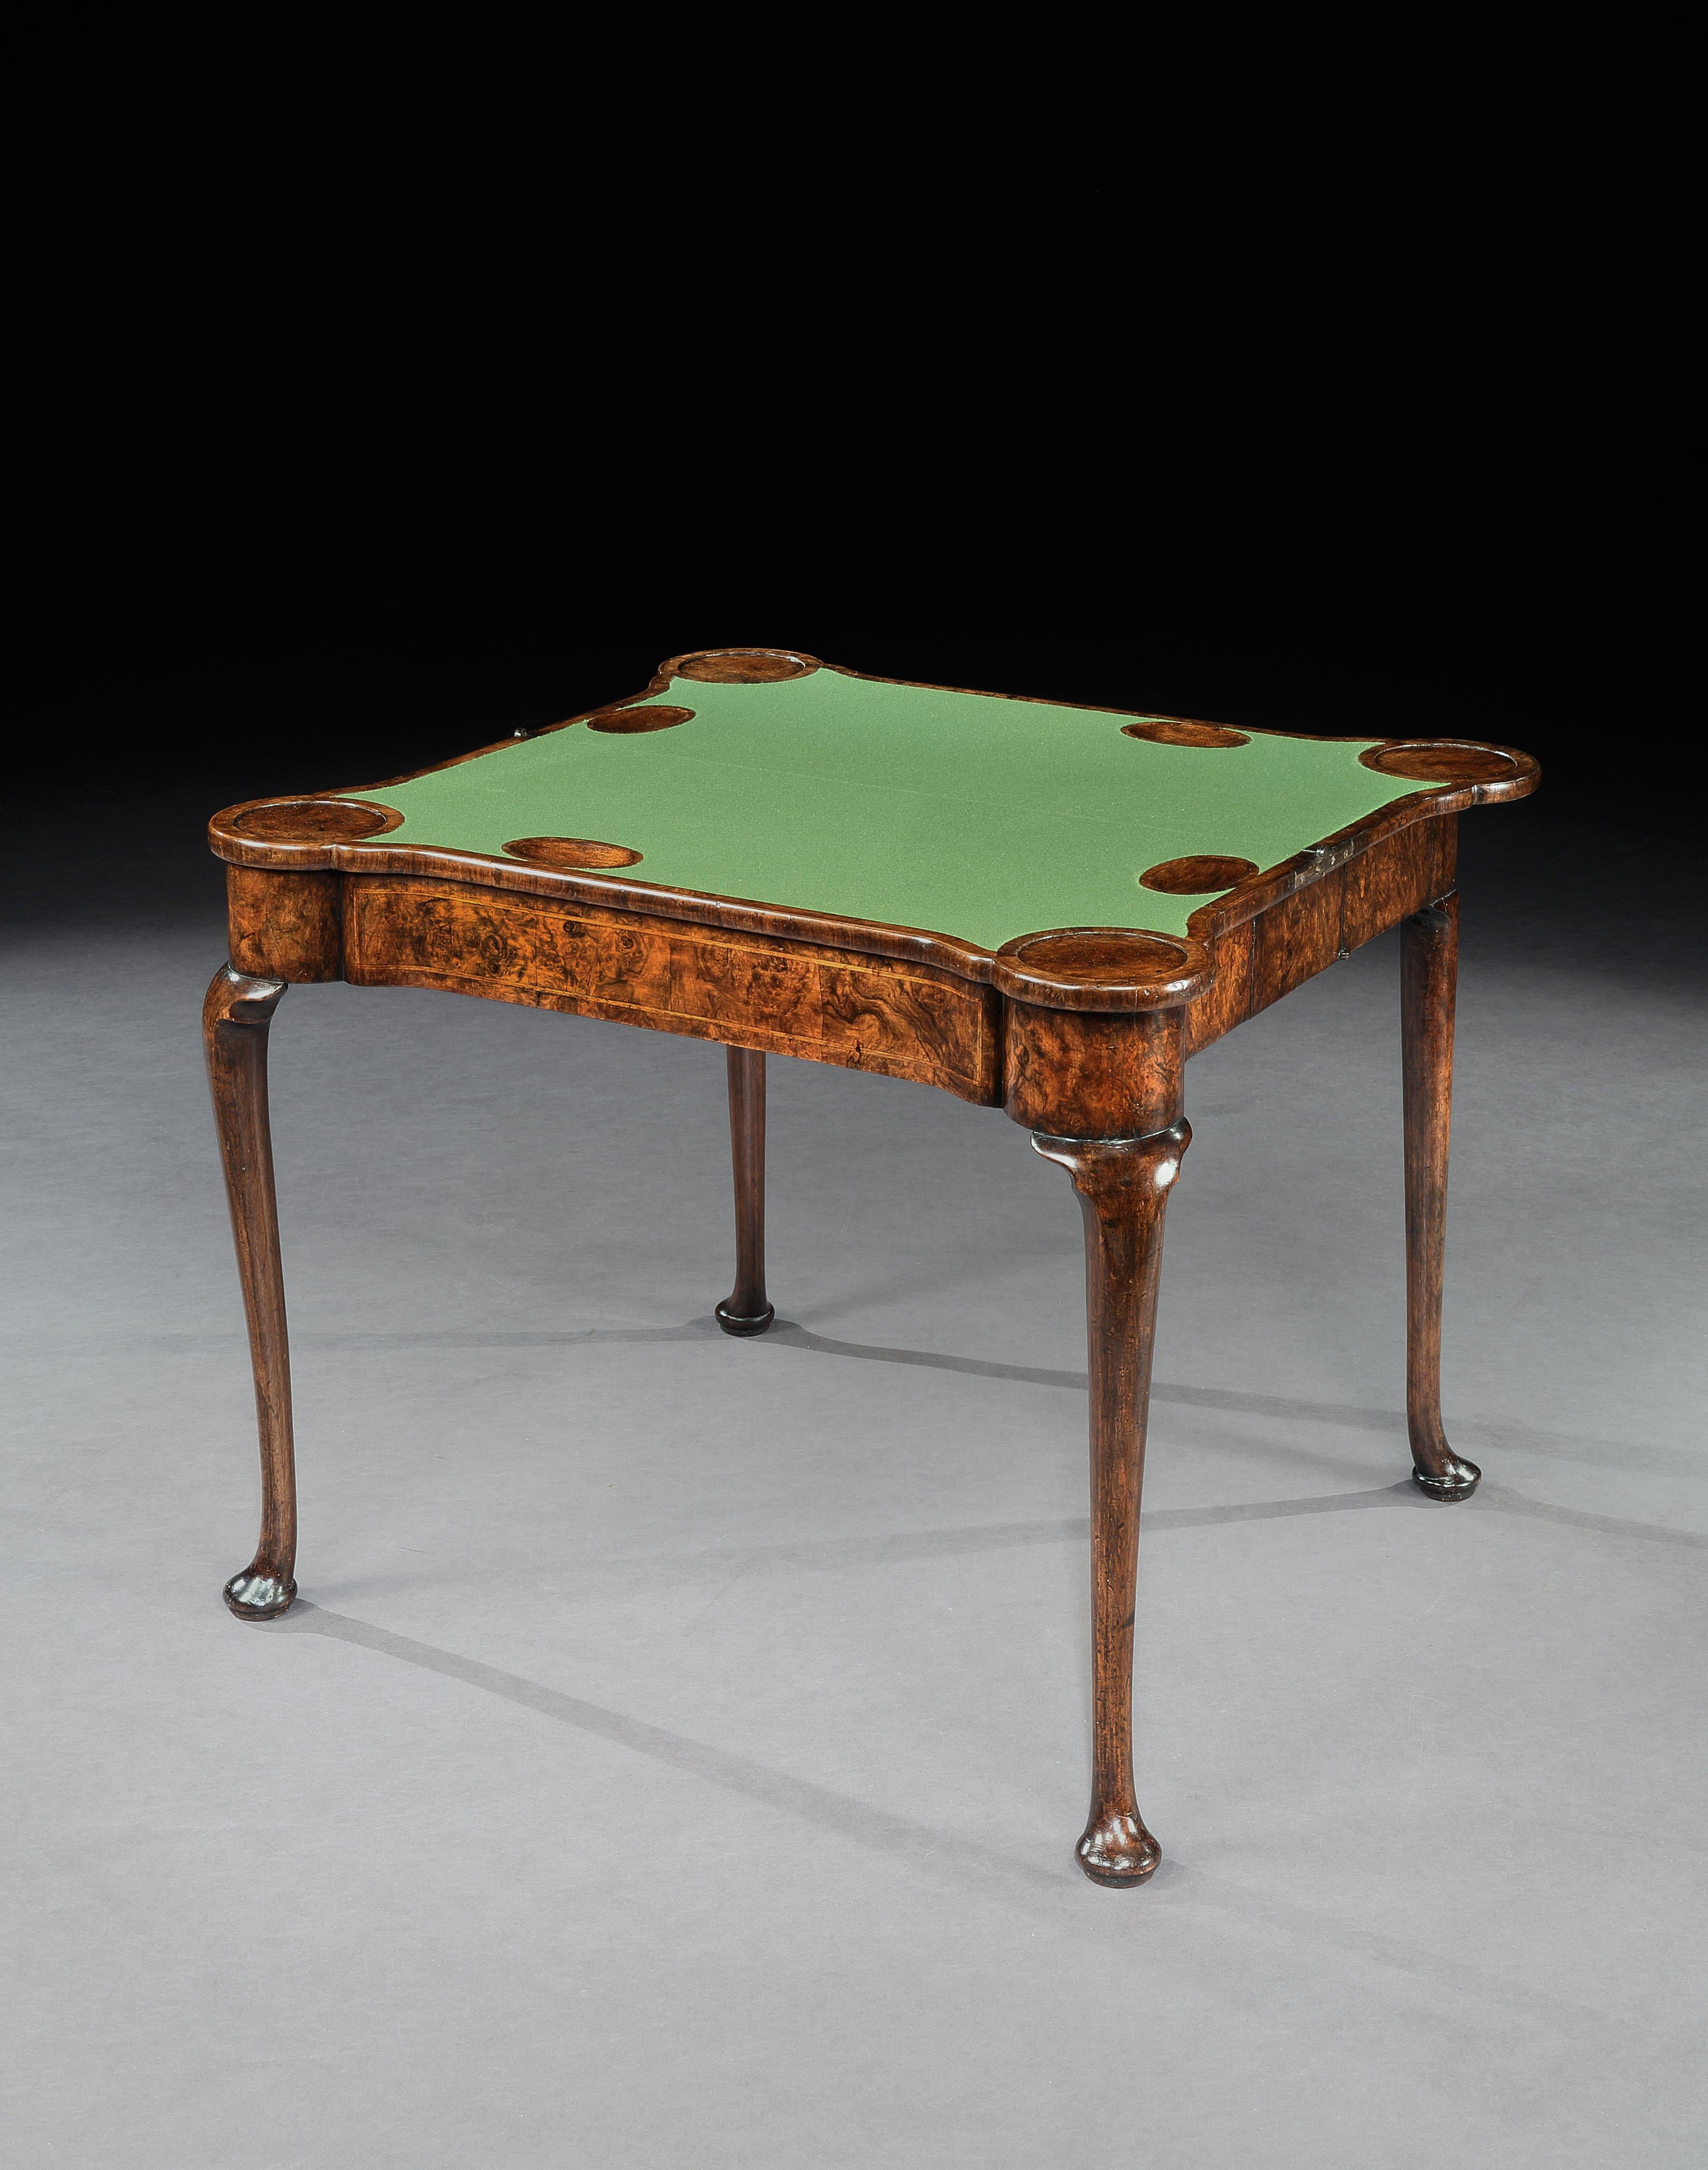 A rare Queen Anne burr walnut concertina card table, the quartered top inlaid with feather bandings, the interior also veneered in burr walnut and inlaid with feather bandings.

English, circa 1710.

This table bears many of the characteristics